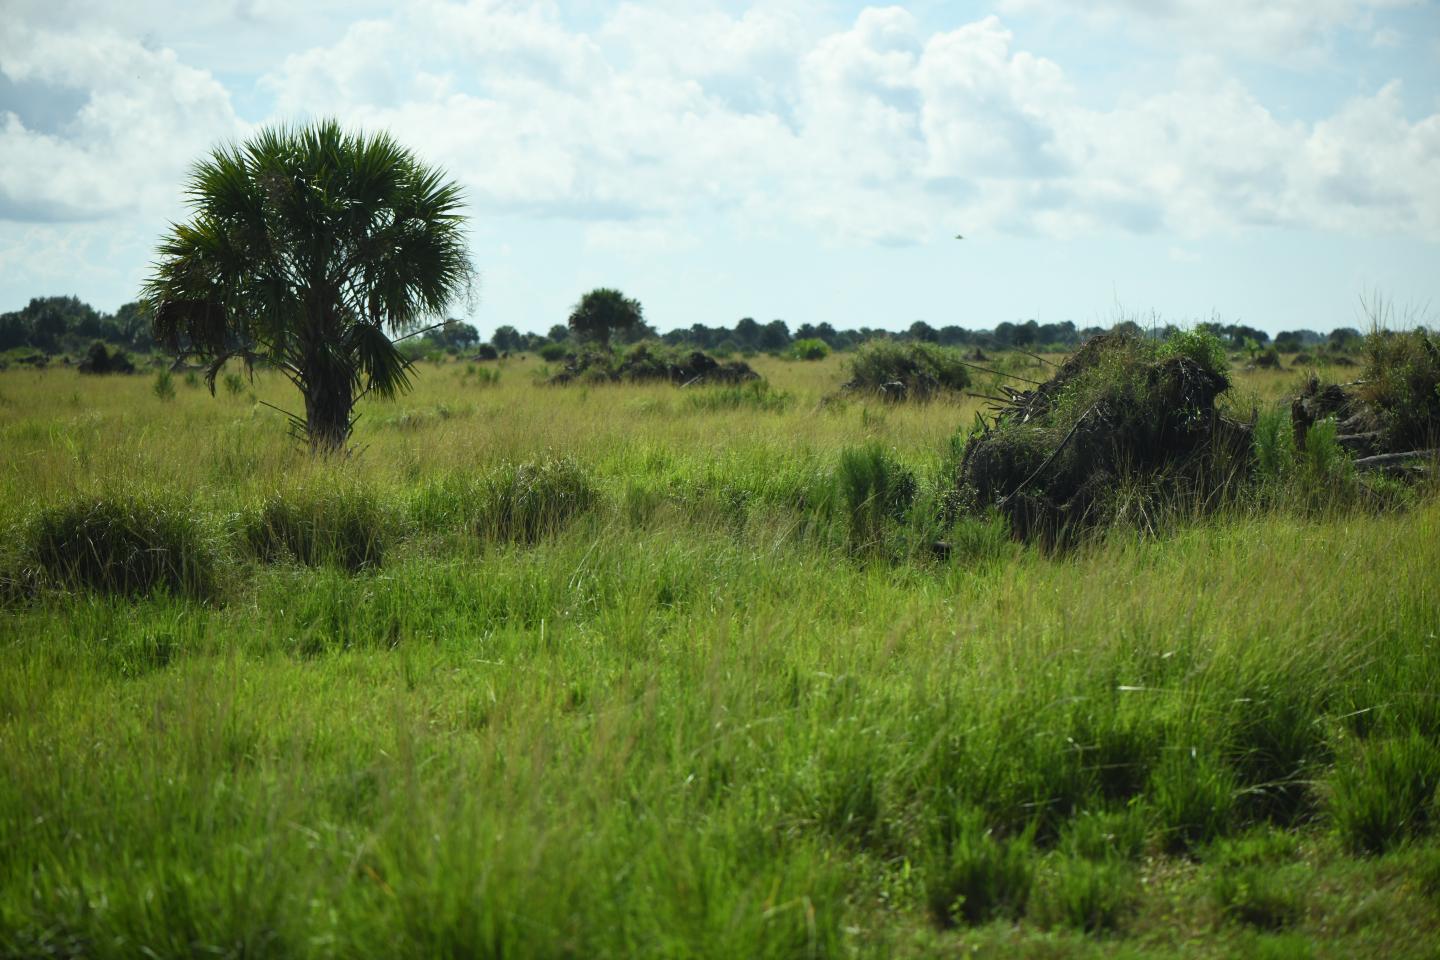 Okeechobee County Florida cattle ranch field with grass and palm tree no cattle